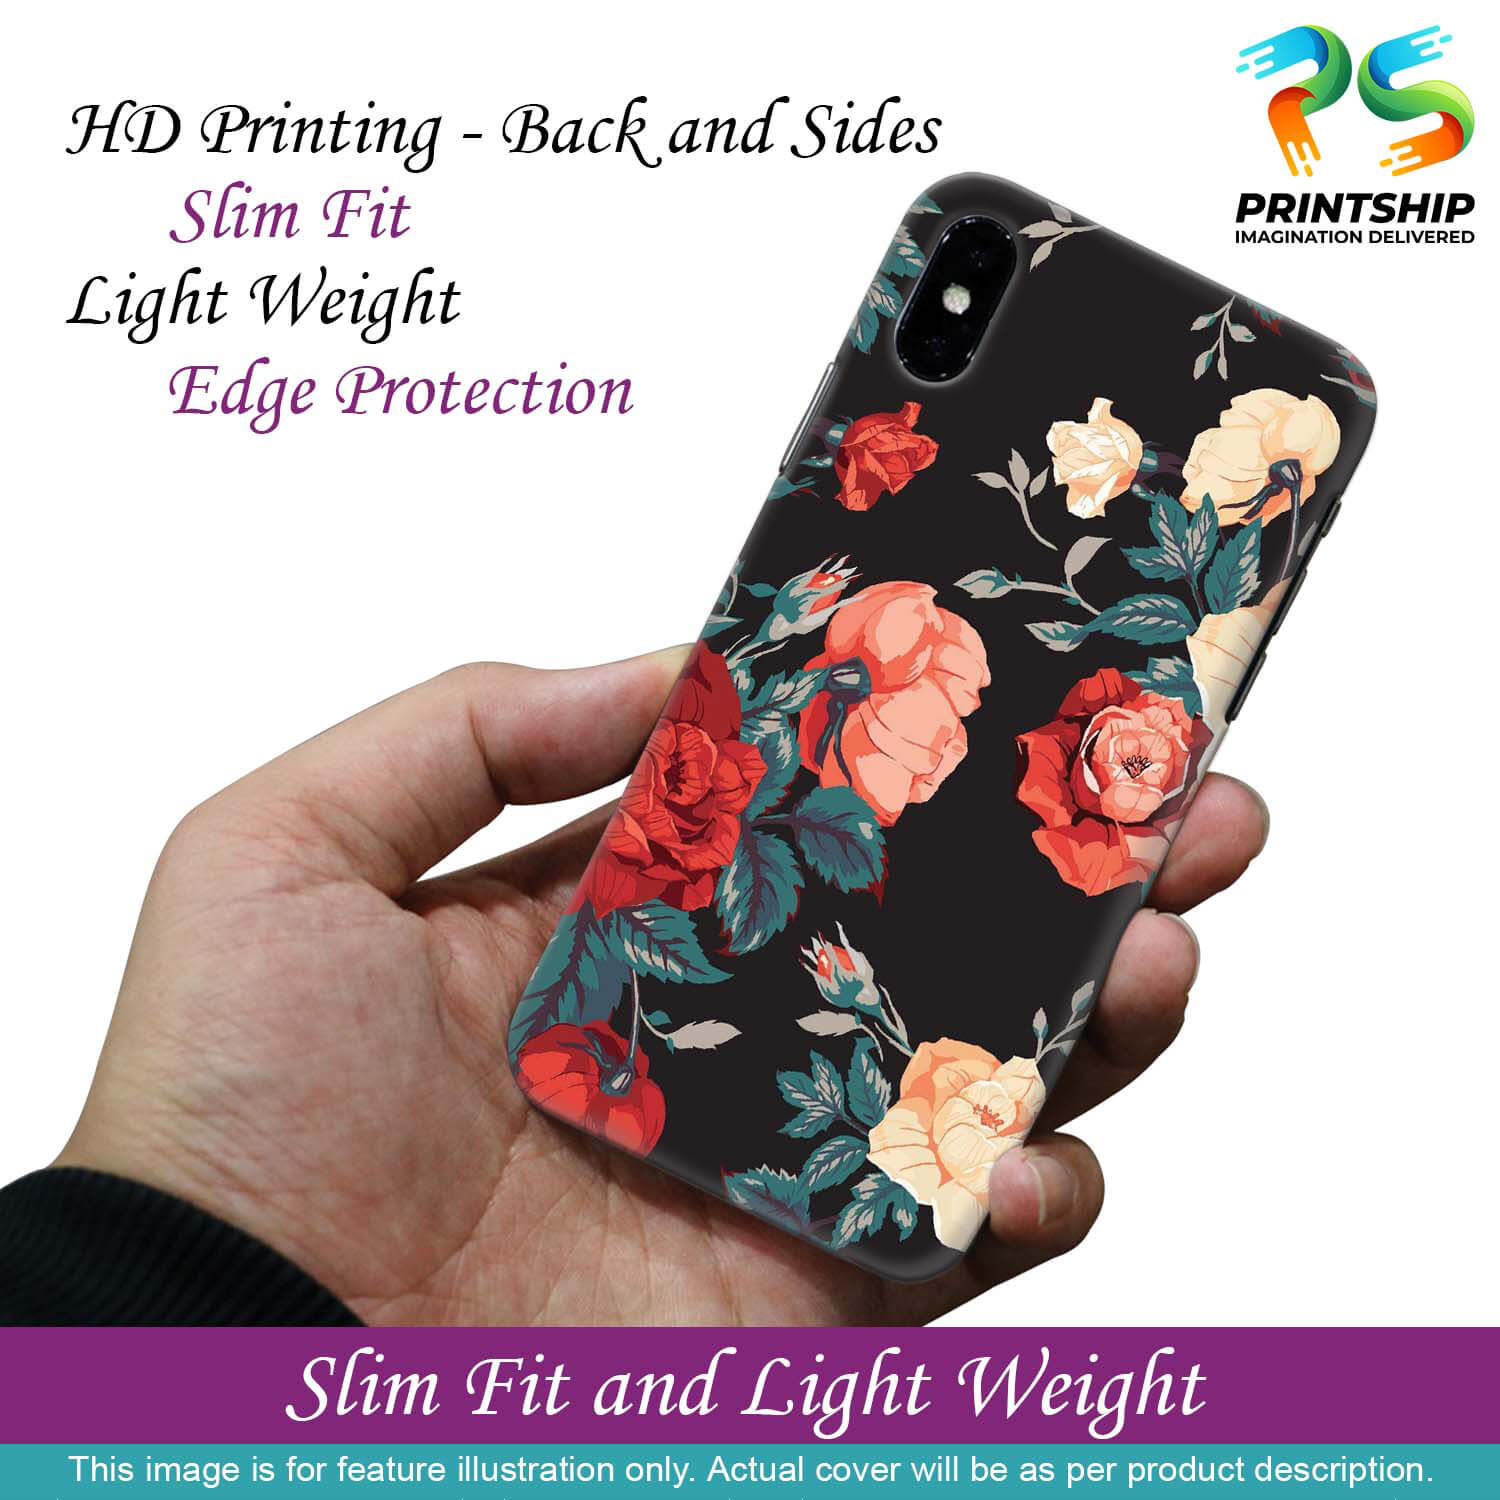 PS1340-Premium Flowers Back Cover for Google Pixel 4